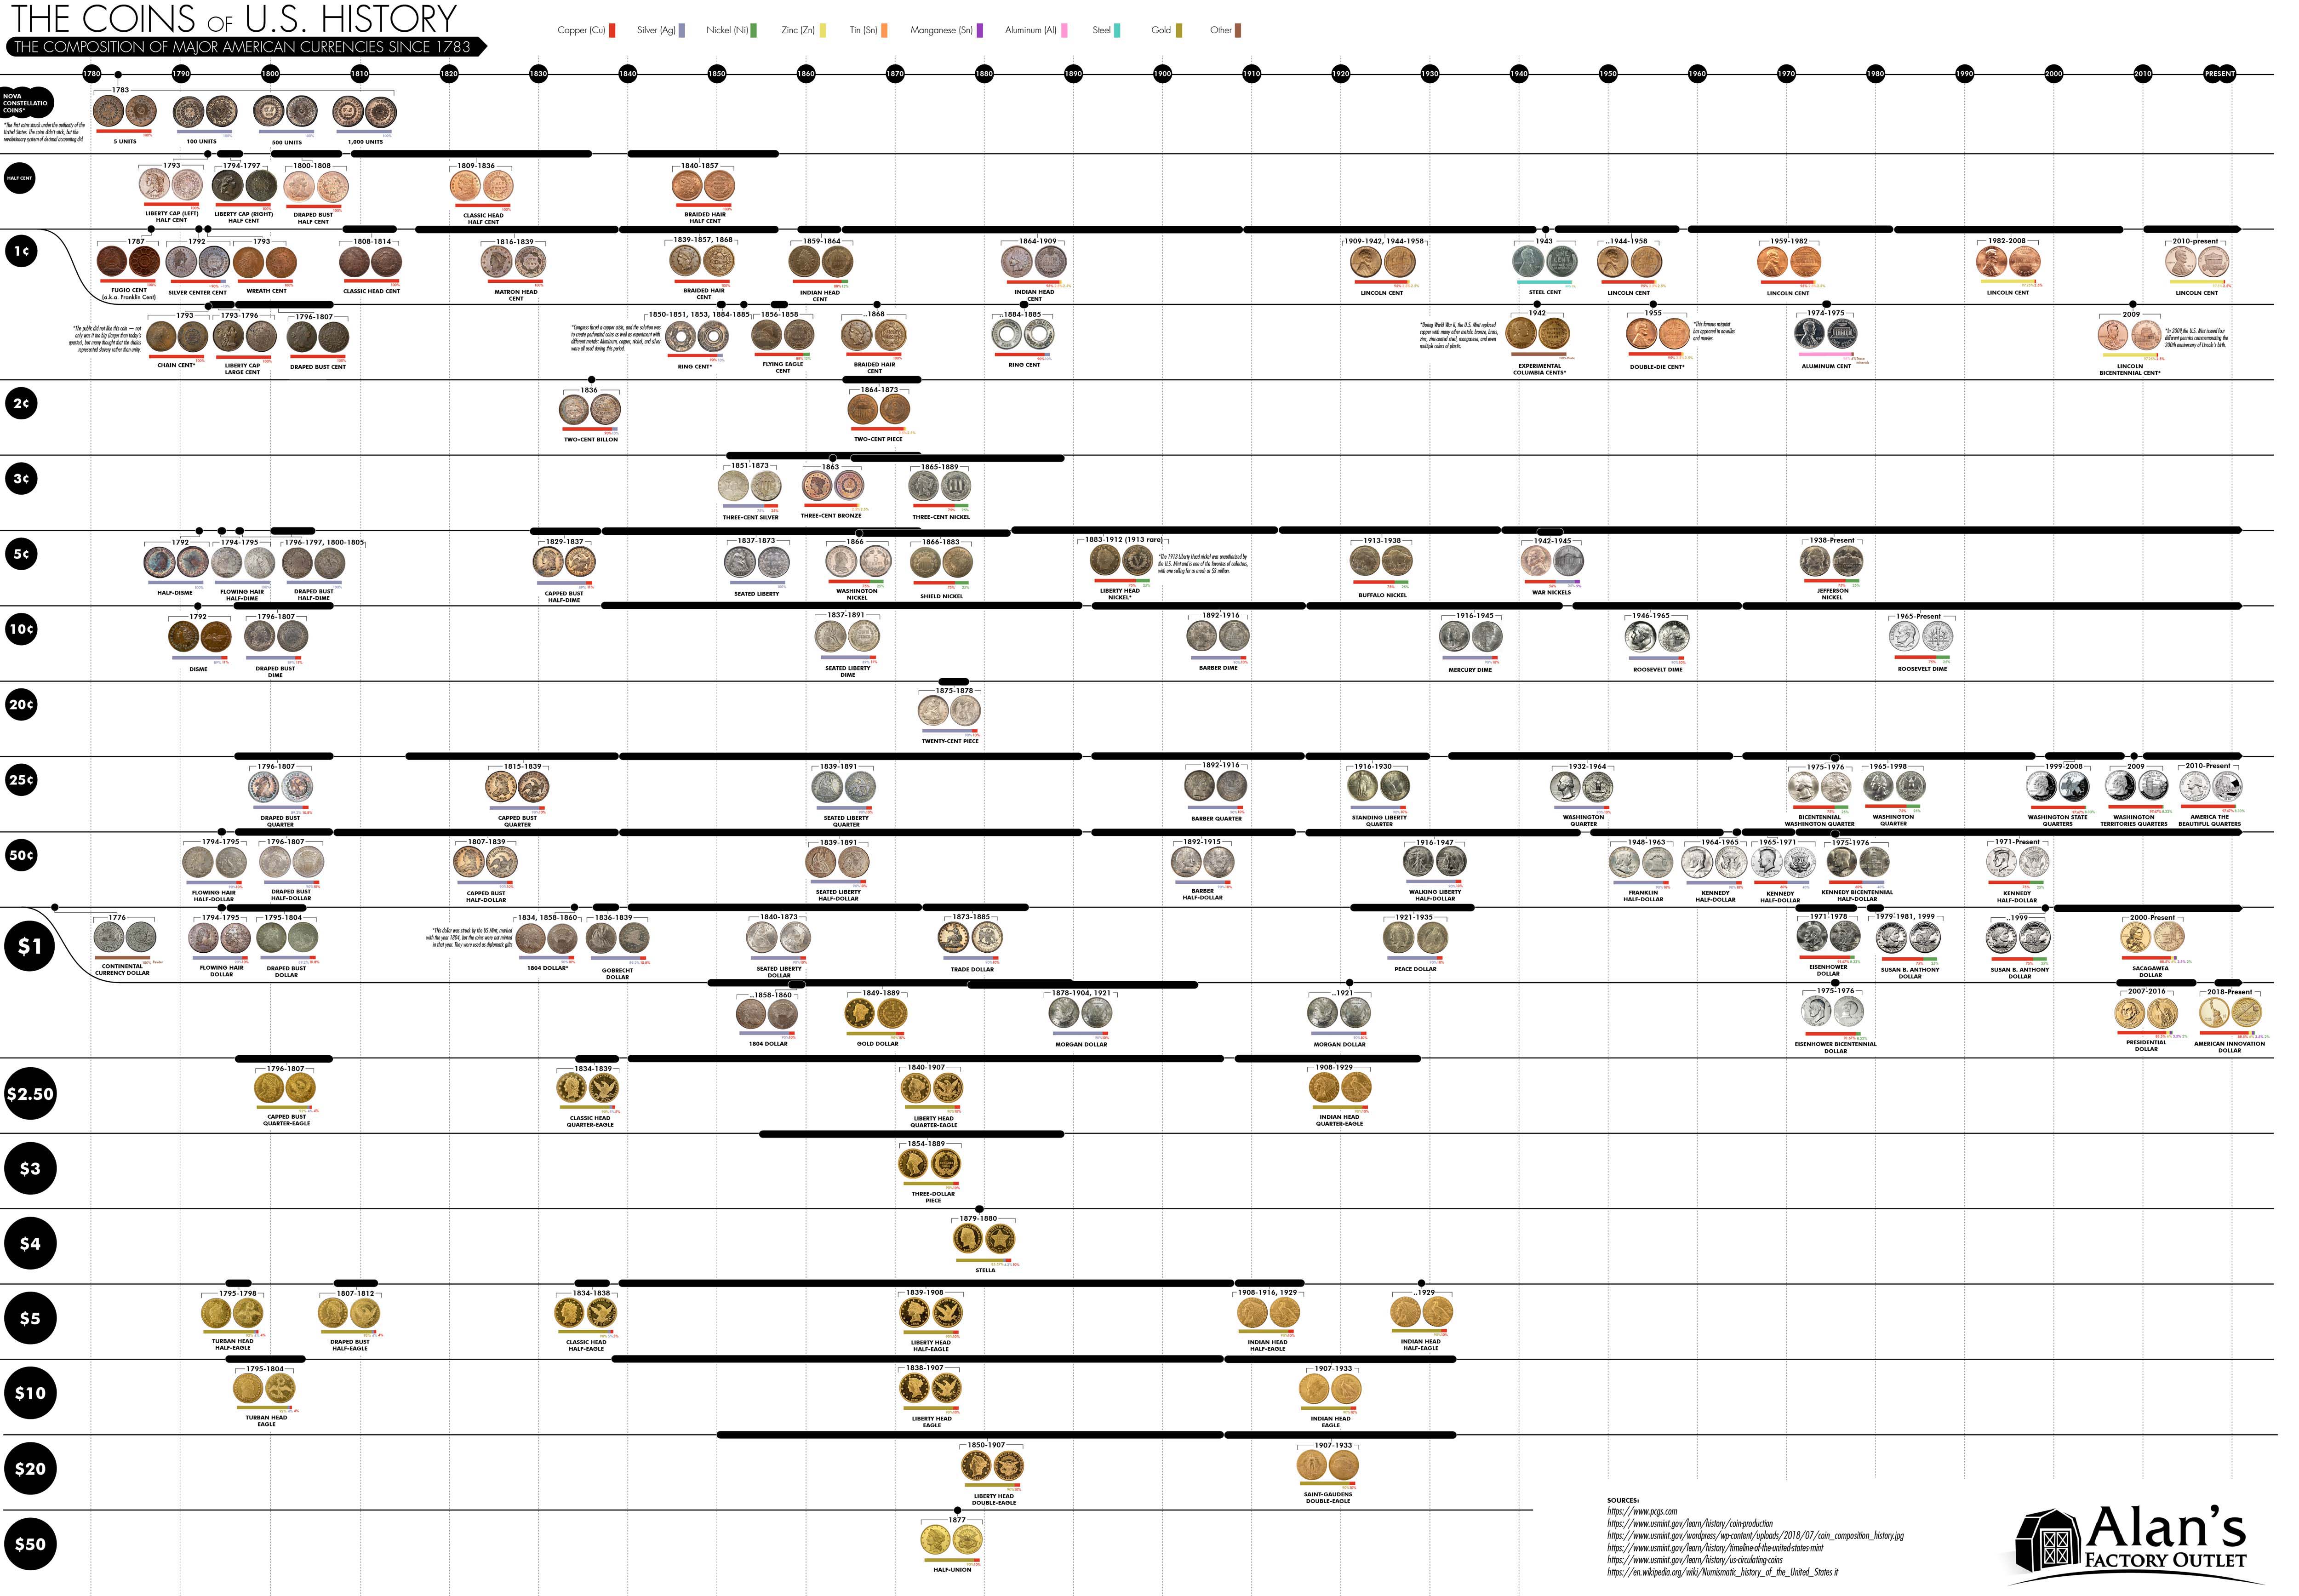 The Metal Composition of American Coins Since 1783